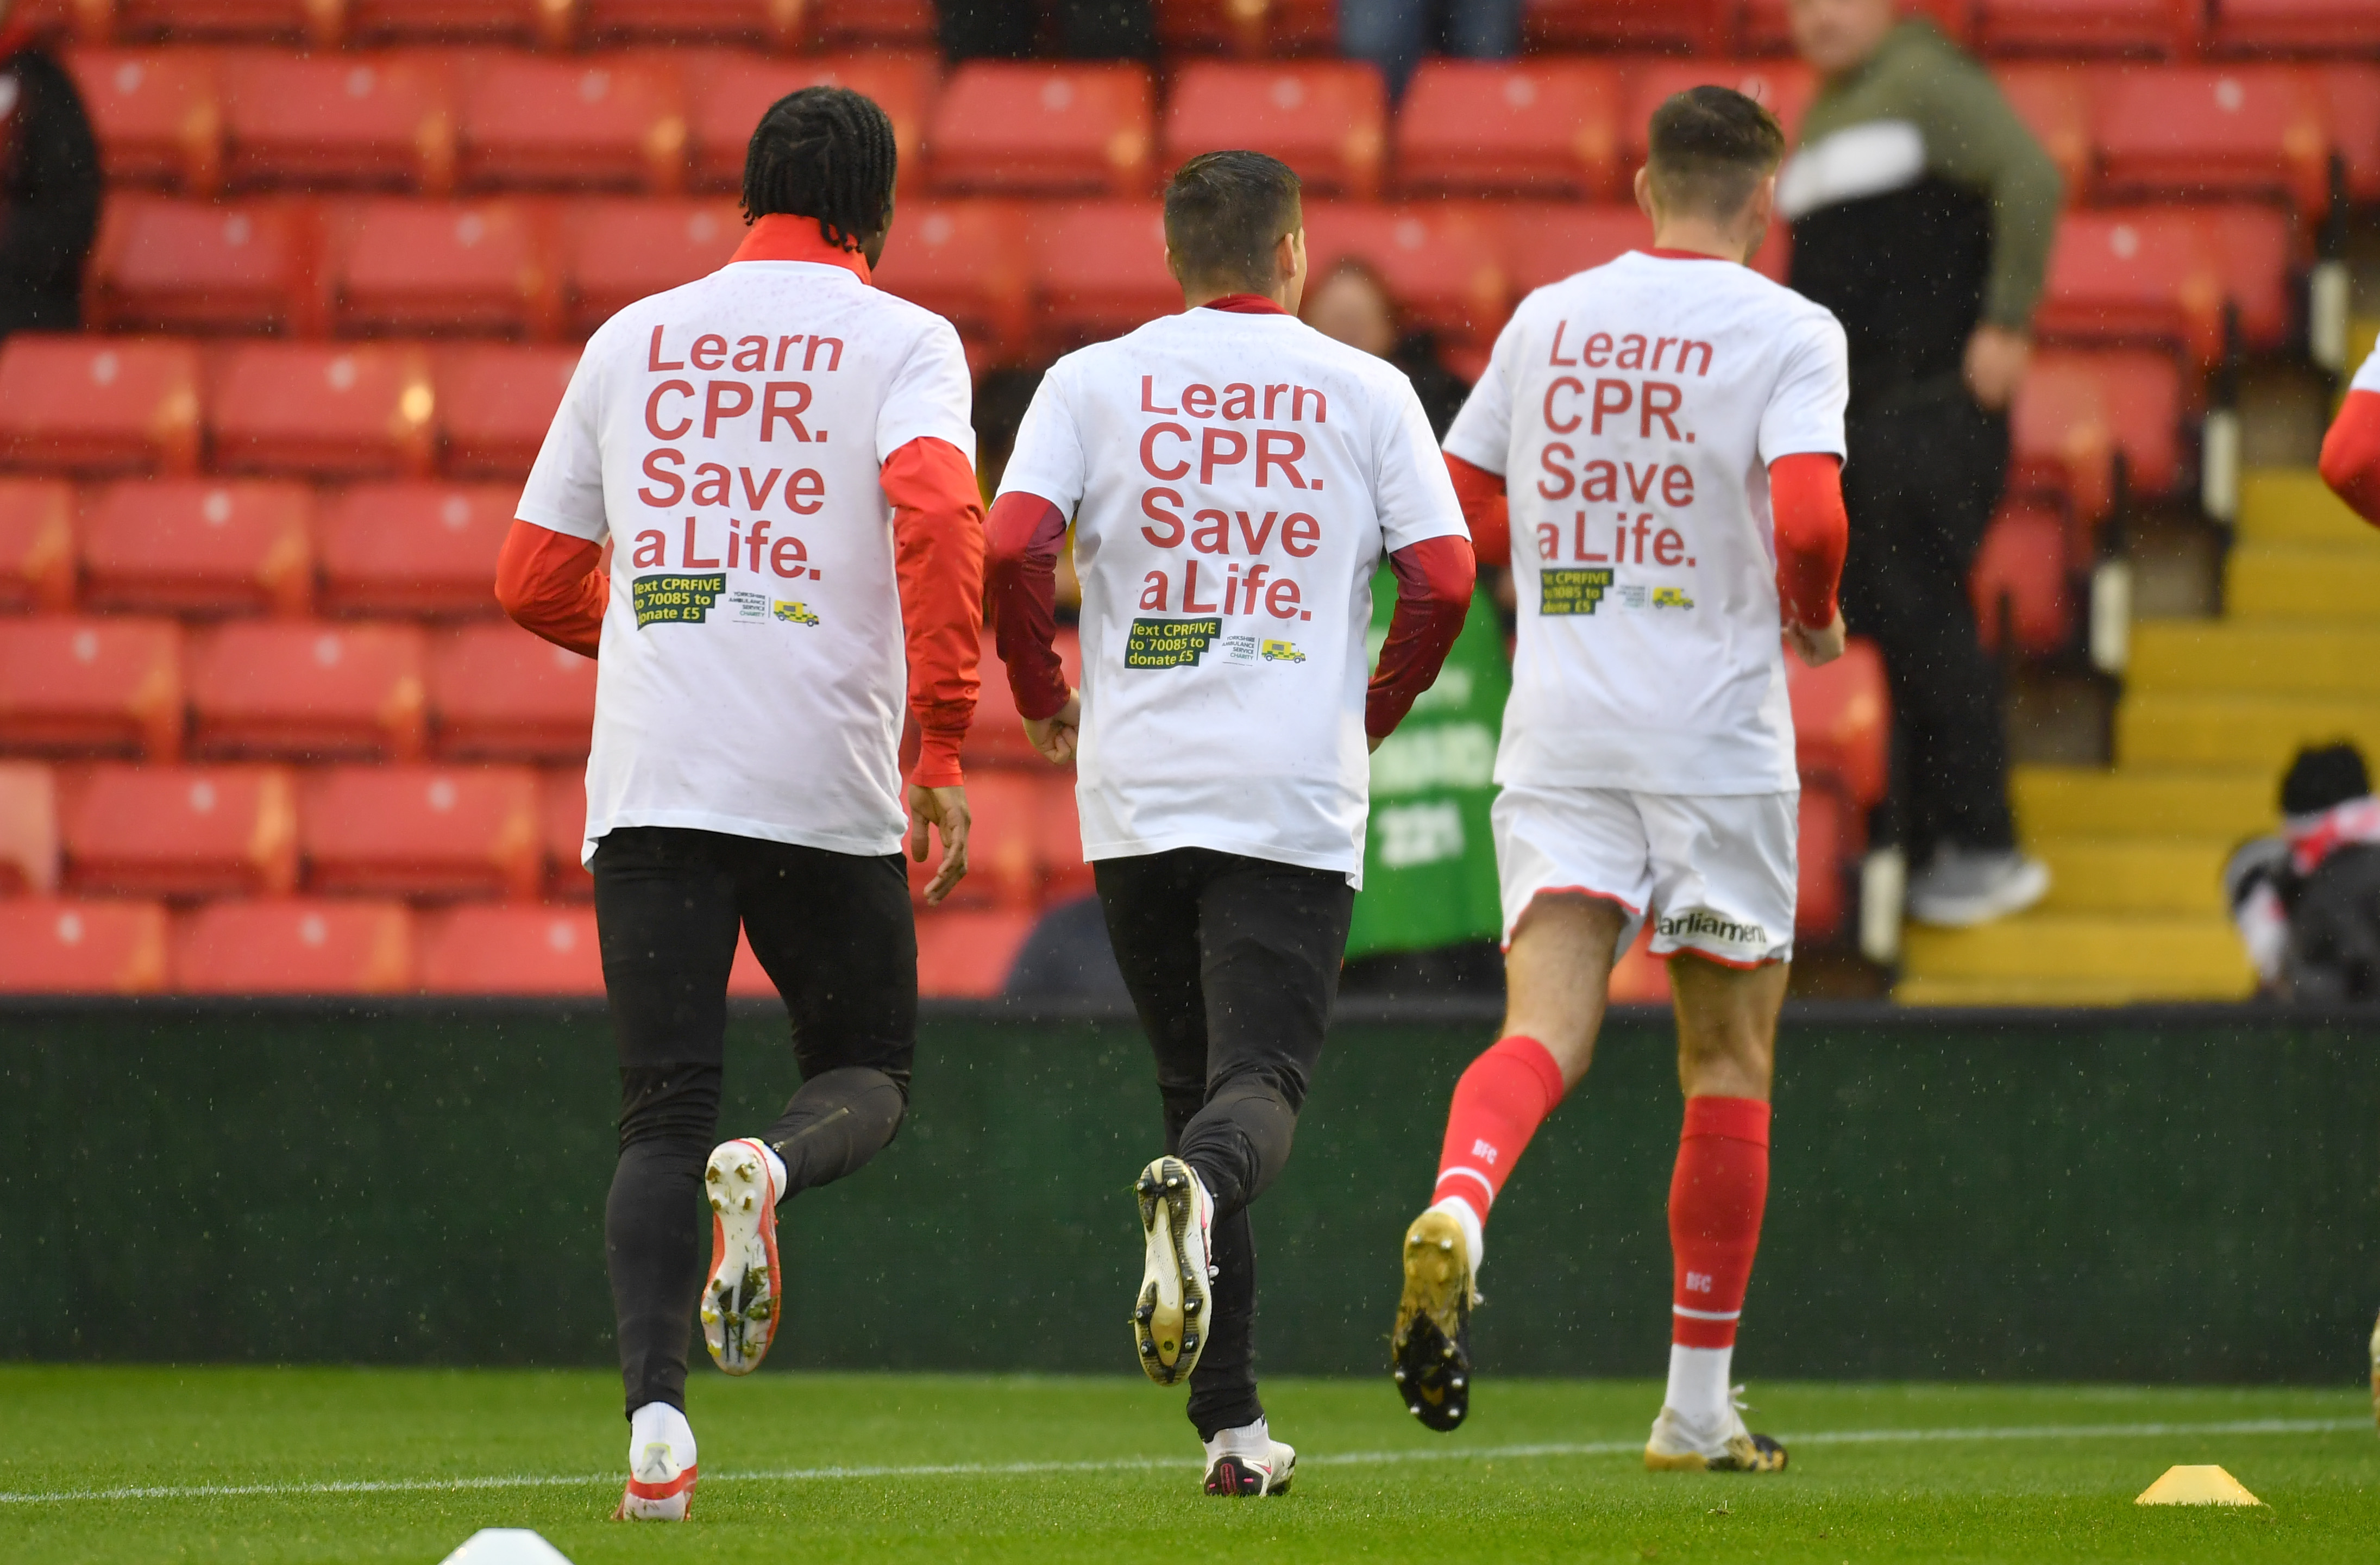 Barnsley FC player warming up wearing the Learn CPR. Save a Life t-shirts.